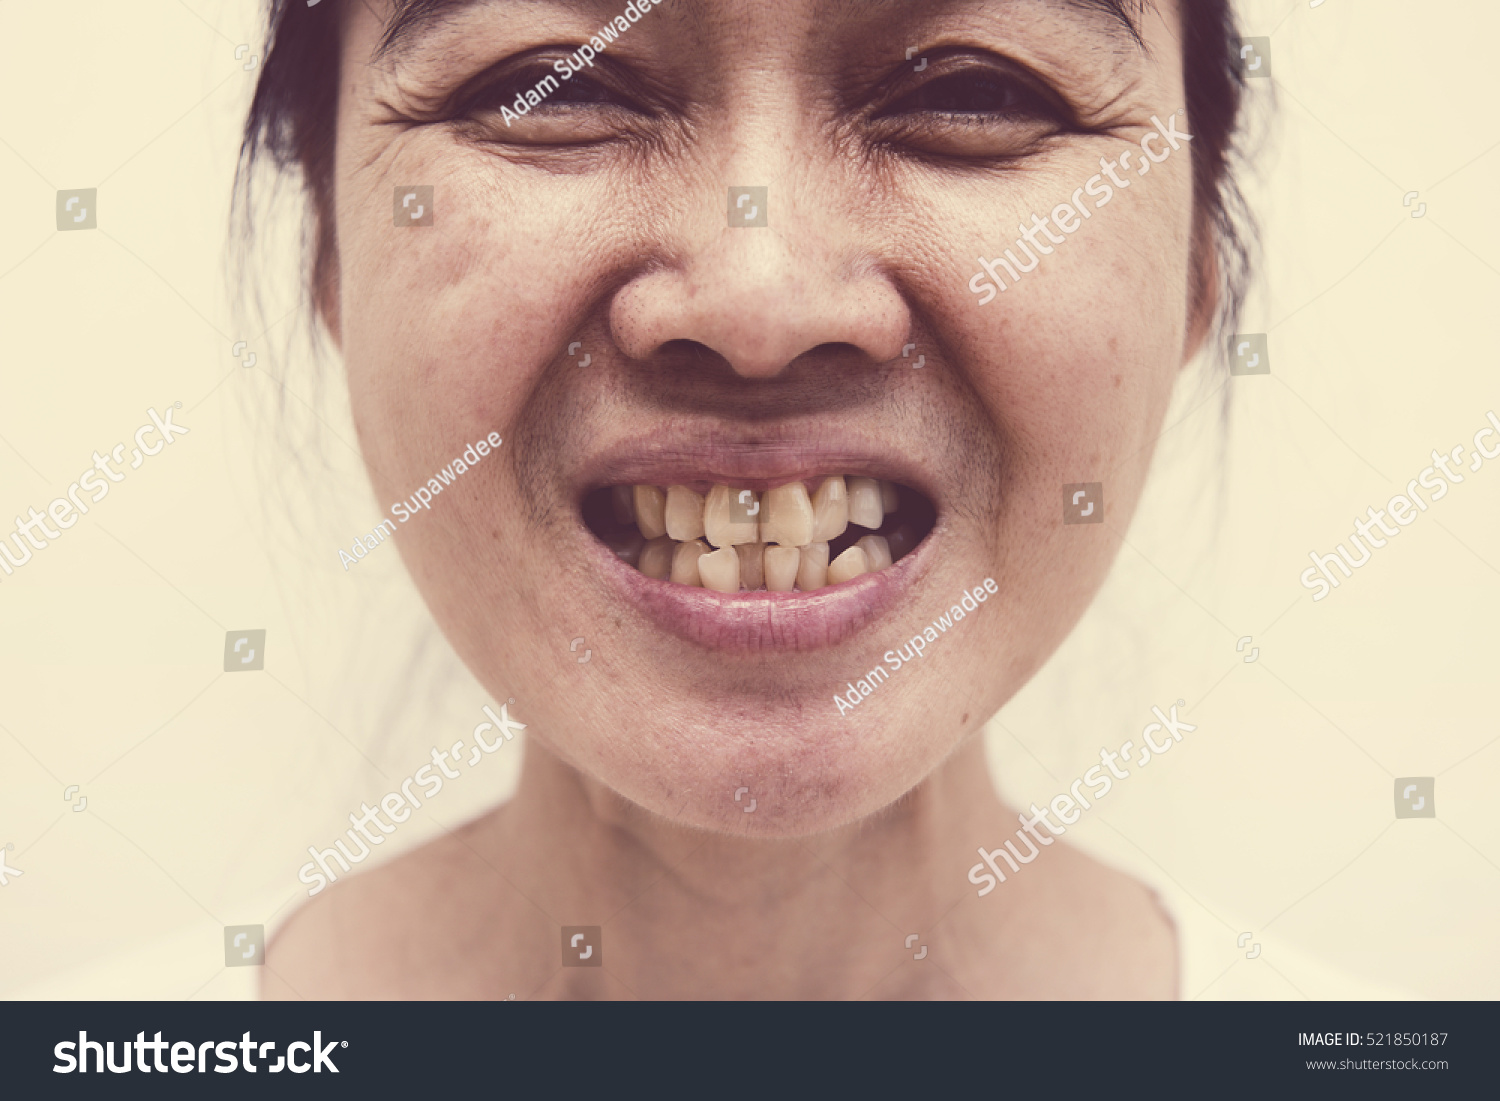 Woman with rotten teeth